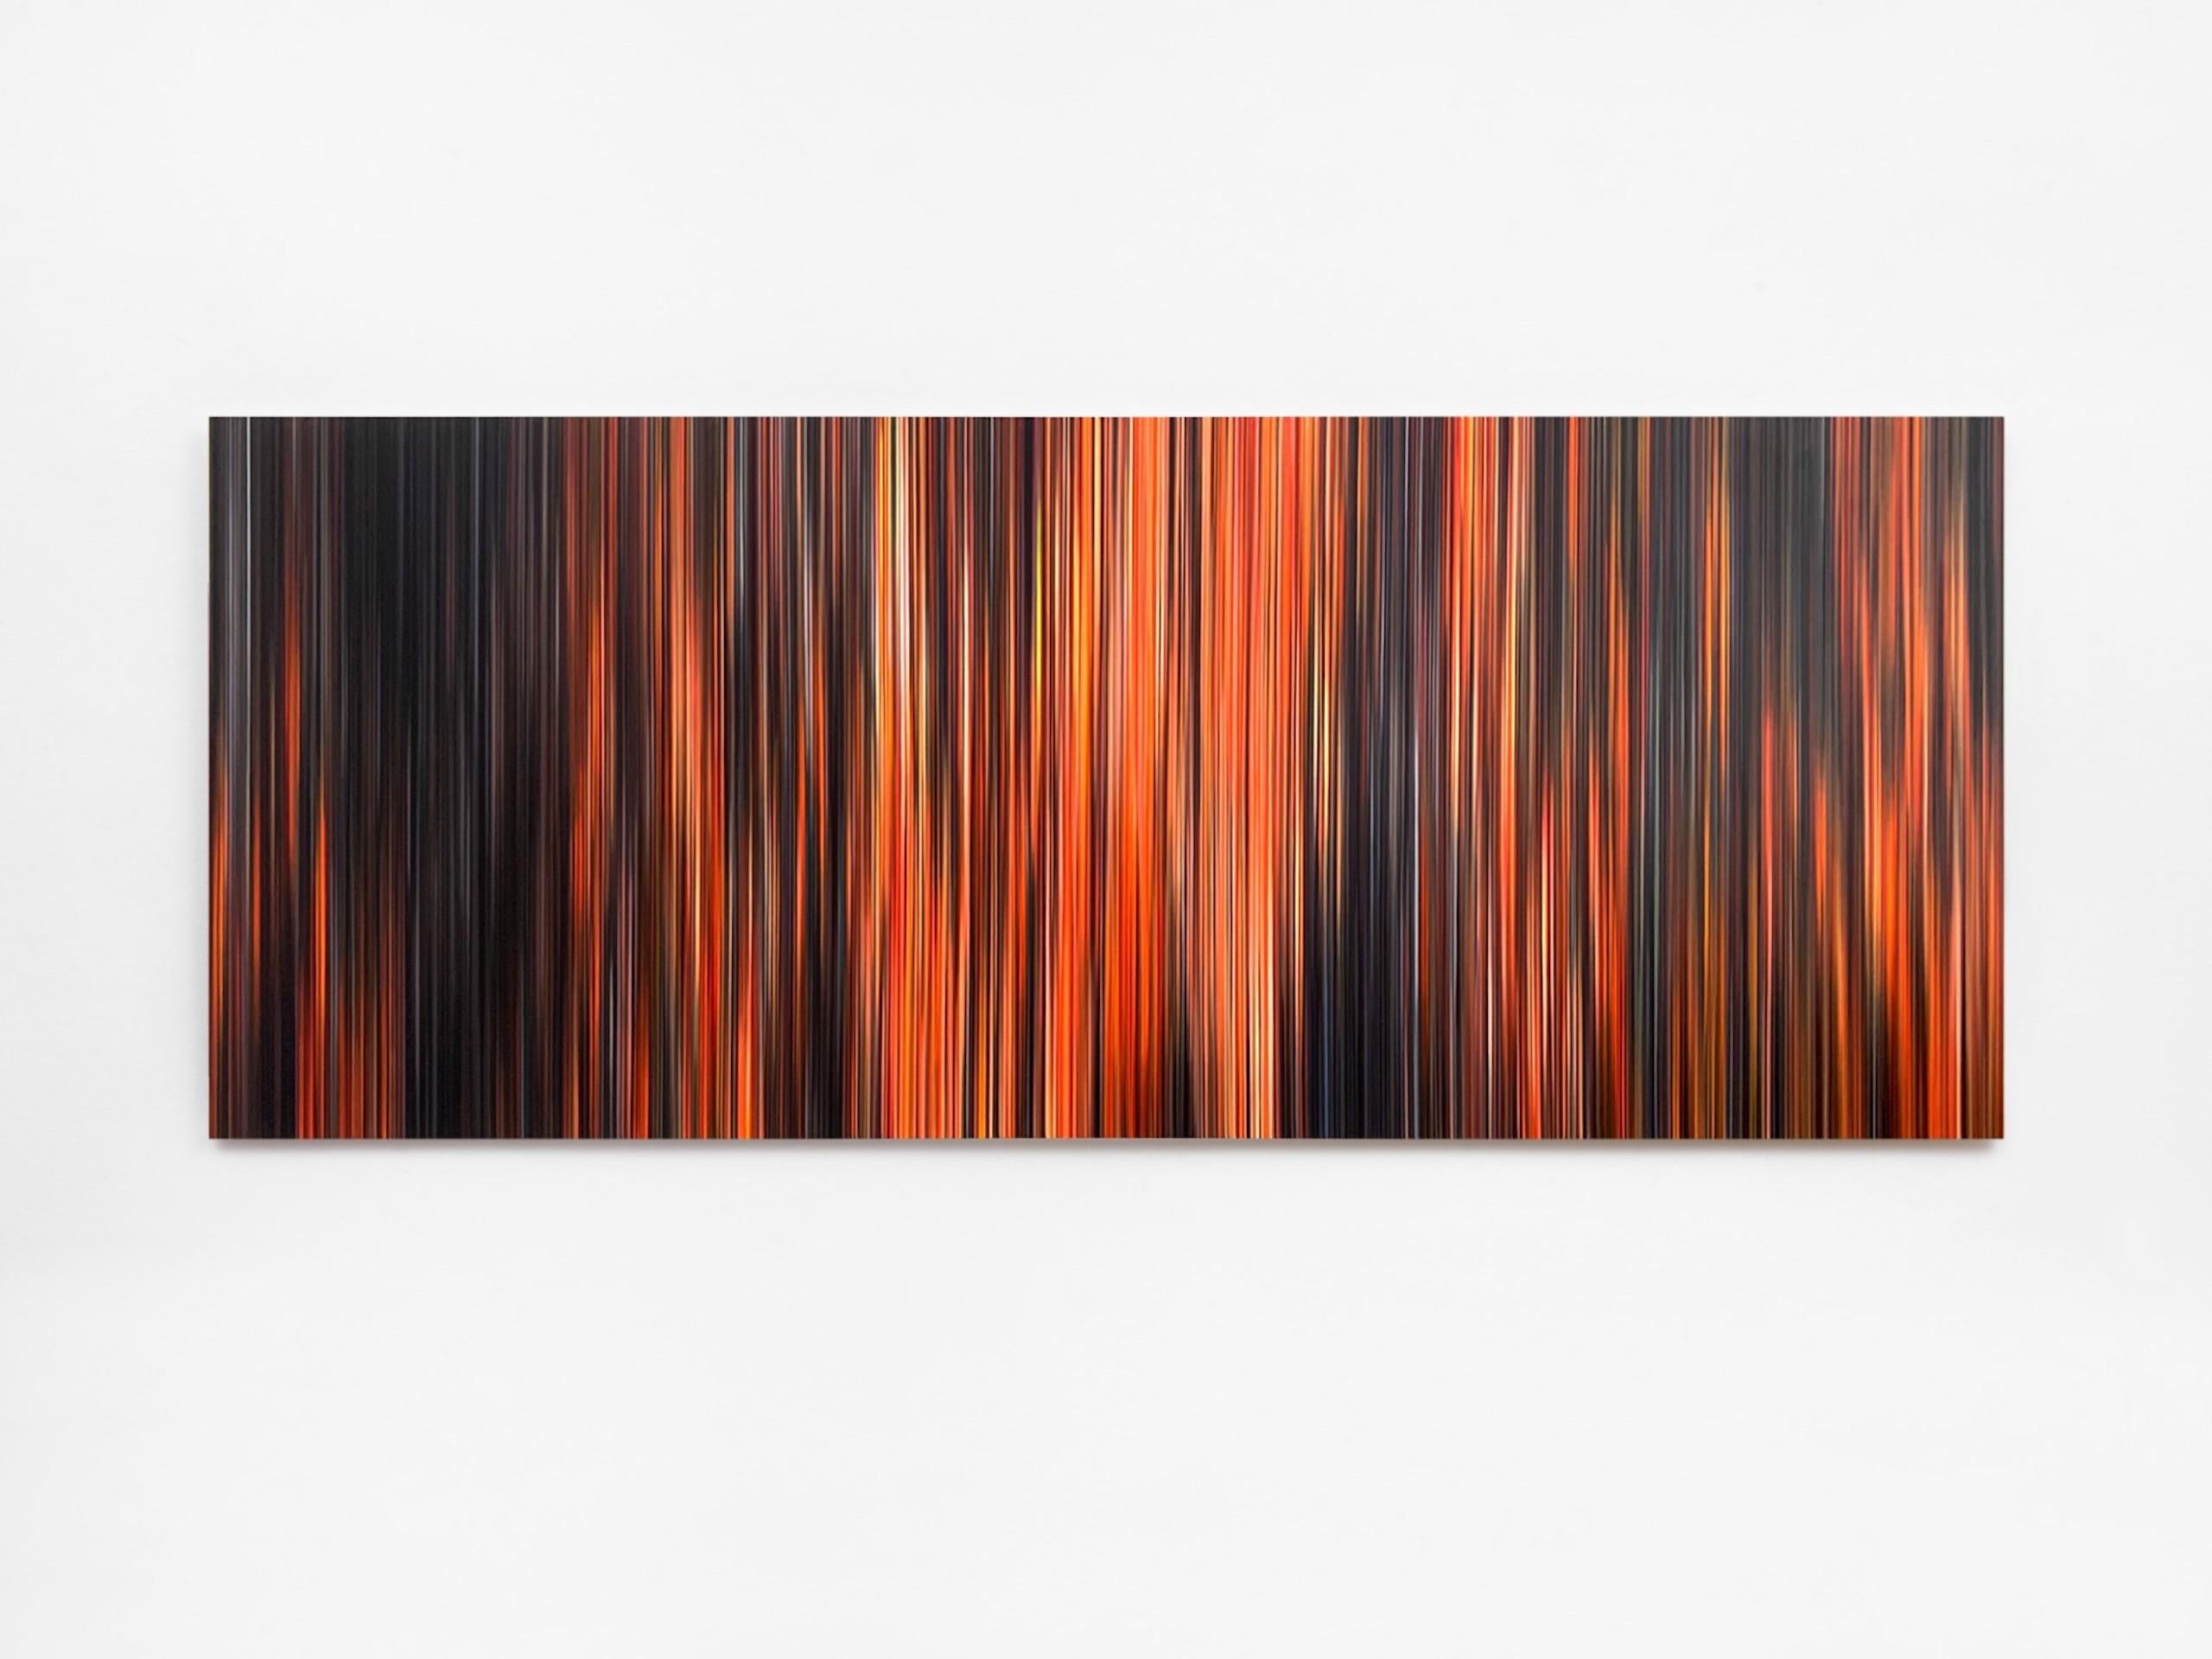 Light’n’Lines No.32 is a unique oil on Alu-Dibond painting by contemporary artist Doris Marten, dimensions are 80 × 200 cm (31.5 × 78.7 in).
The artwork is signed, sold unframed and comes with a certificate of authenticity.

The visual effects